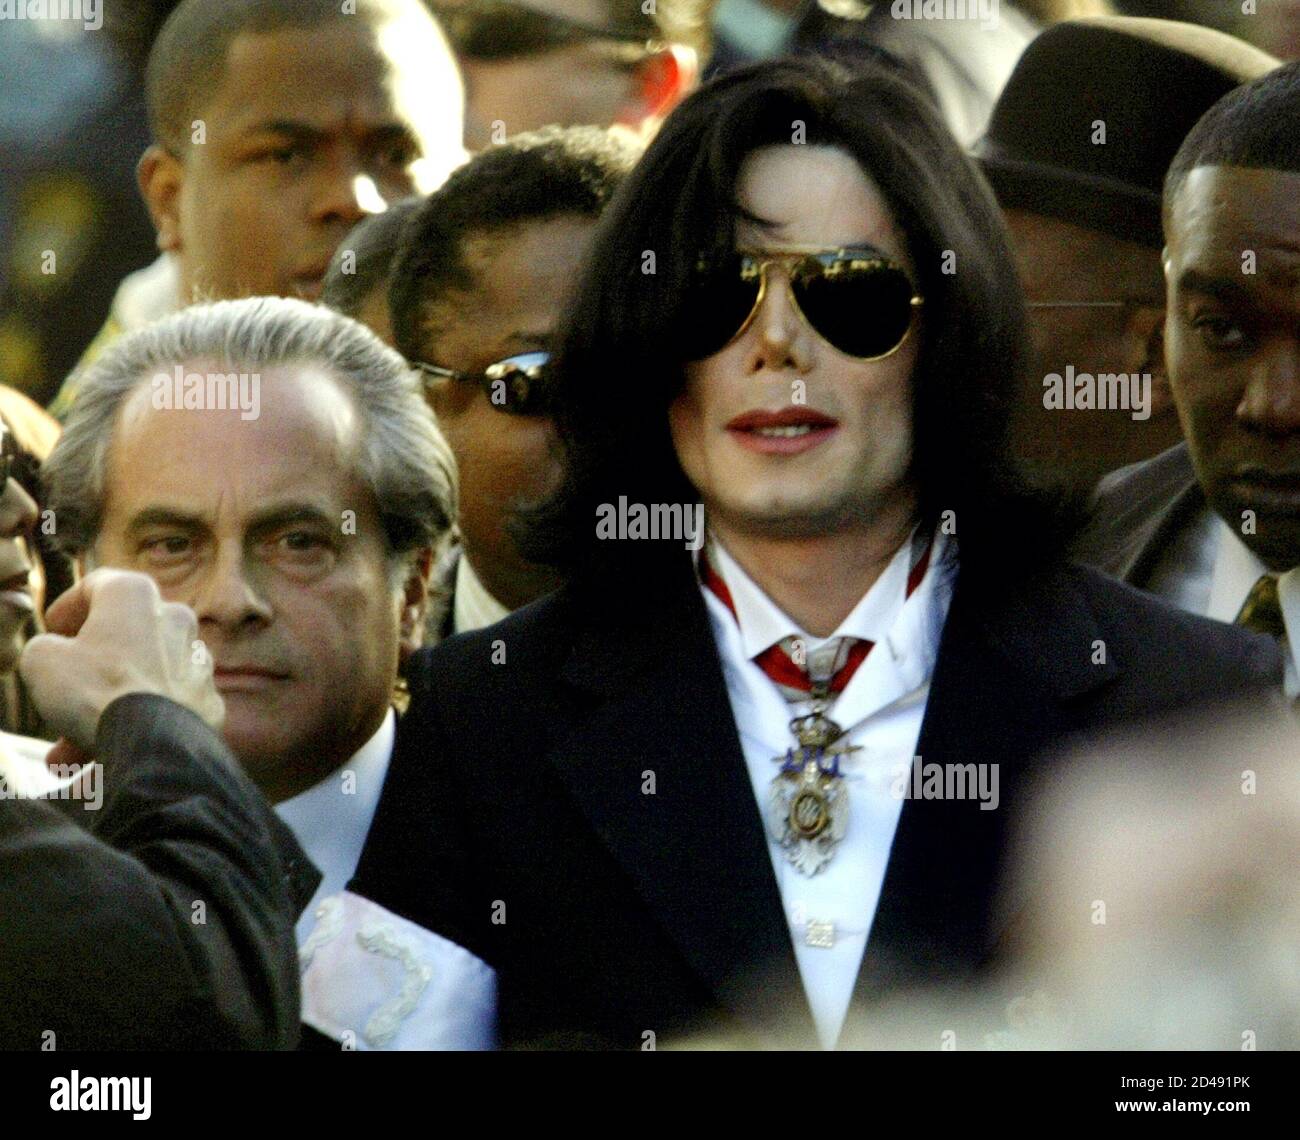 Entertainer Michael Jackson Walks To The Courthouse For His Arraignment In Santa Maria California January 16 04 Hundreds Of Fans From Around The World Sang Songs And Chanted Support As Self Proclaimed King